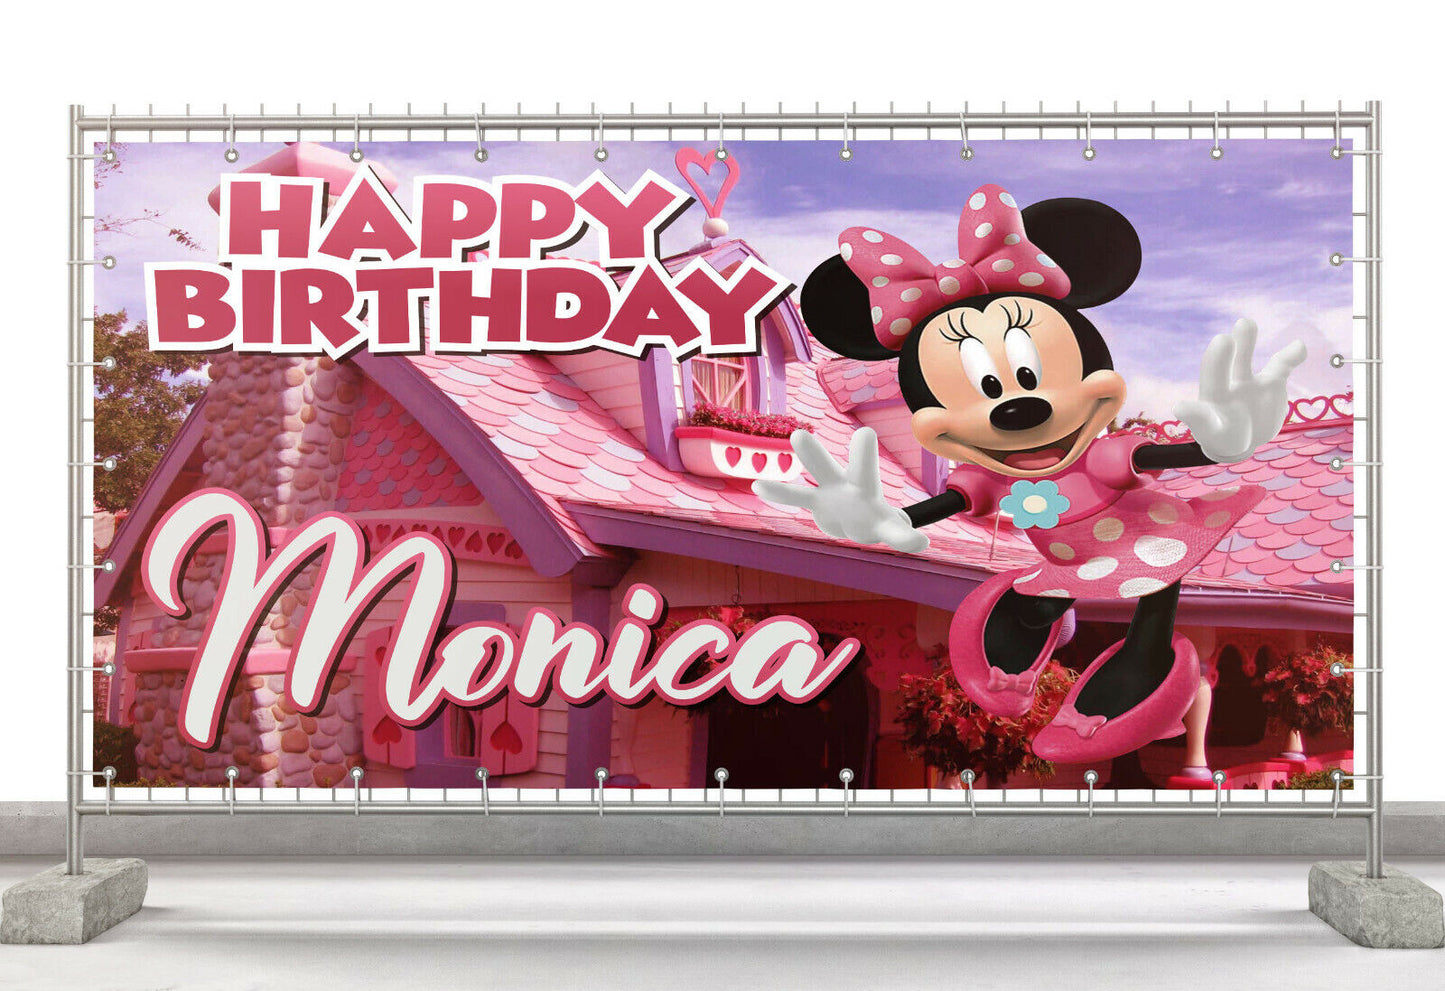 PERSONALISED BIRTHDAY PARTY BANNER BACKDROP DECORATION